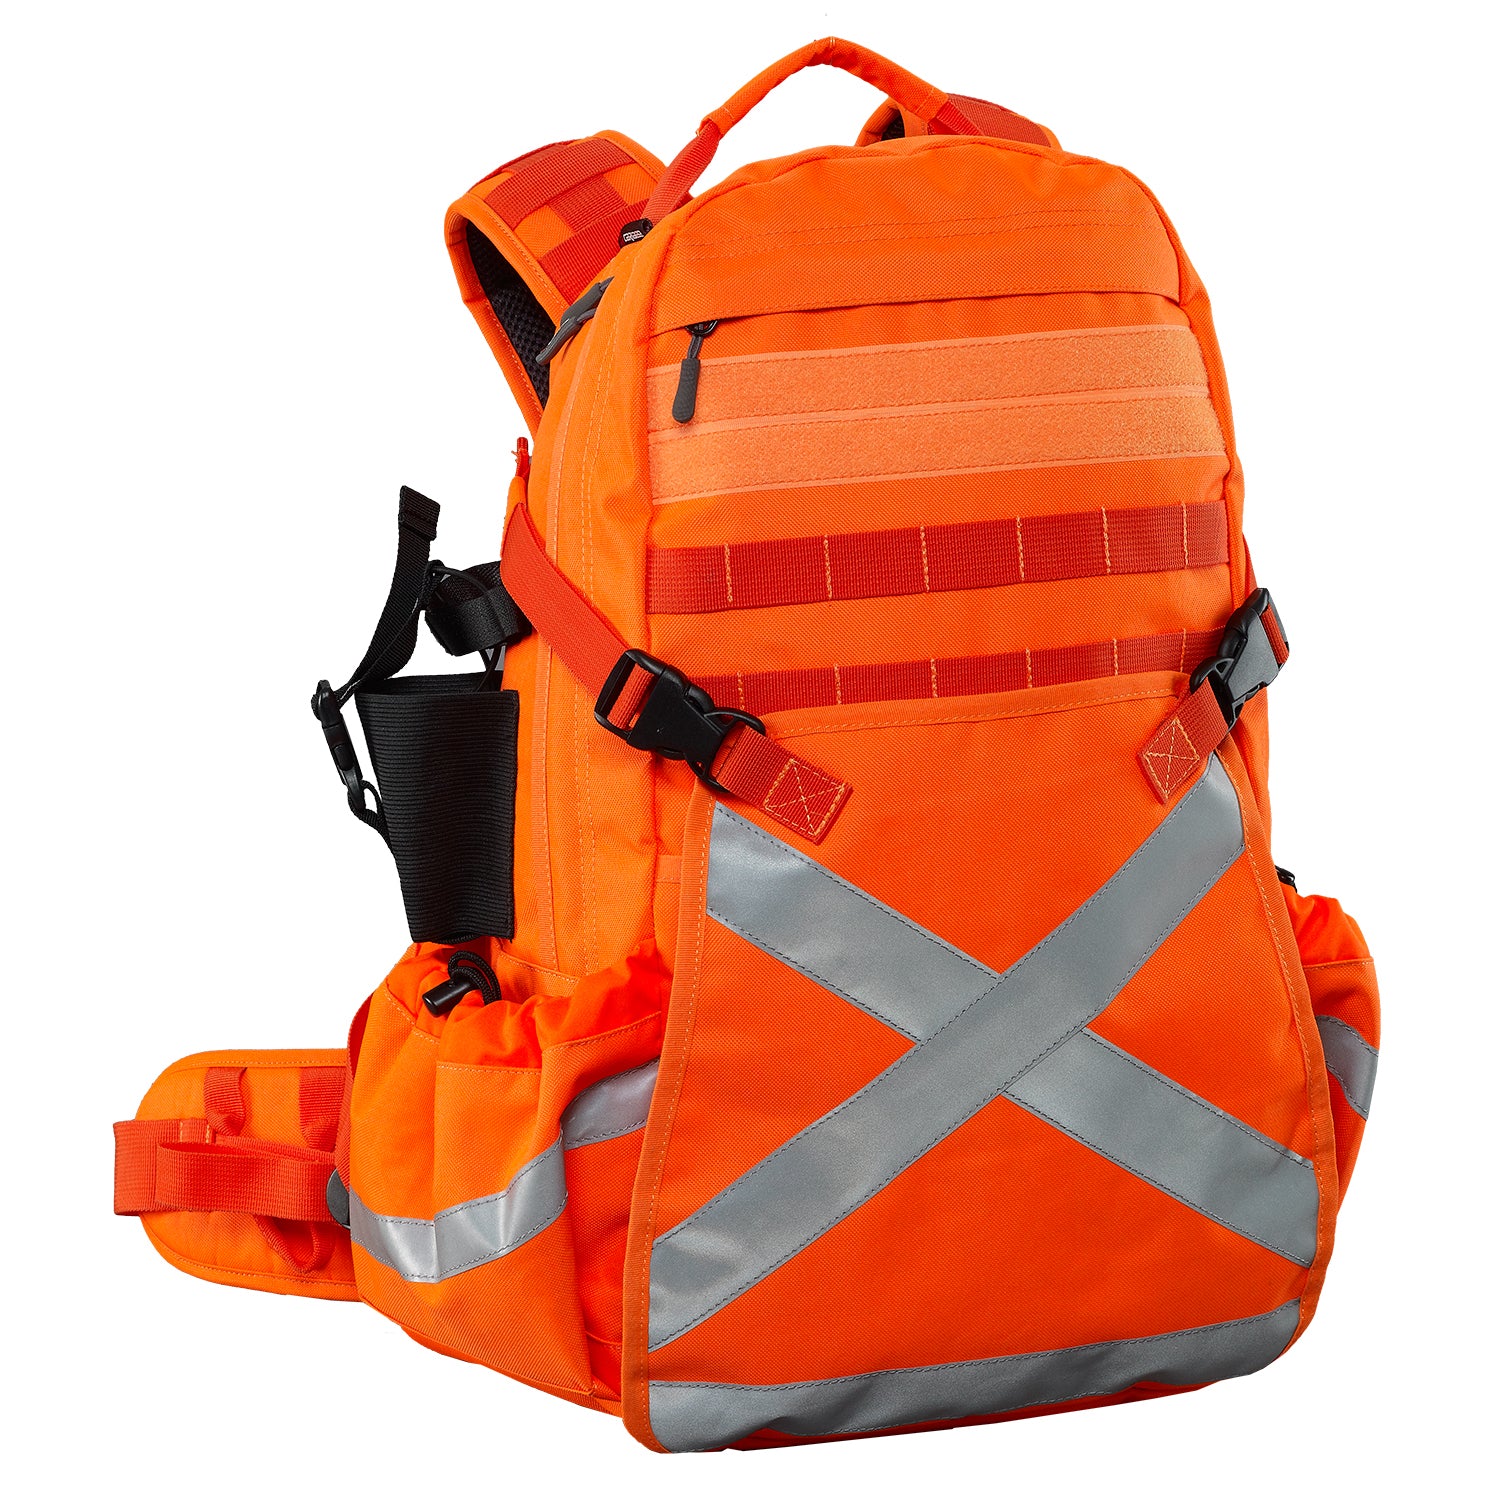 Caribee Mineral King 32L high visibility orange backpack with reflective tape